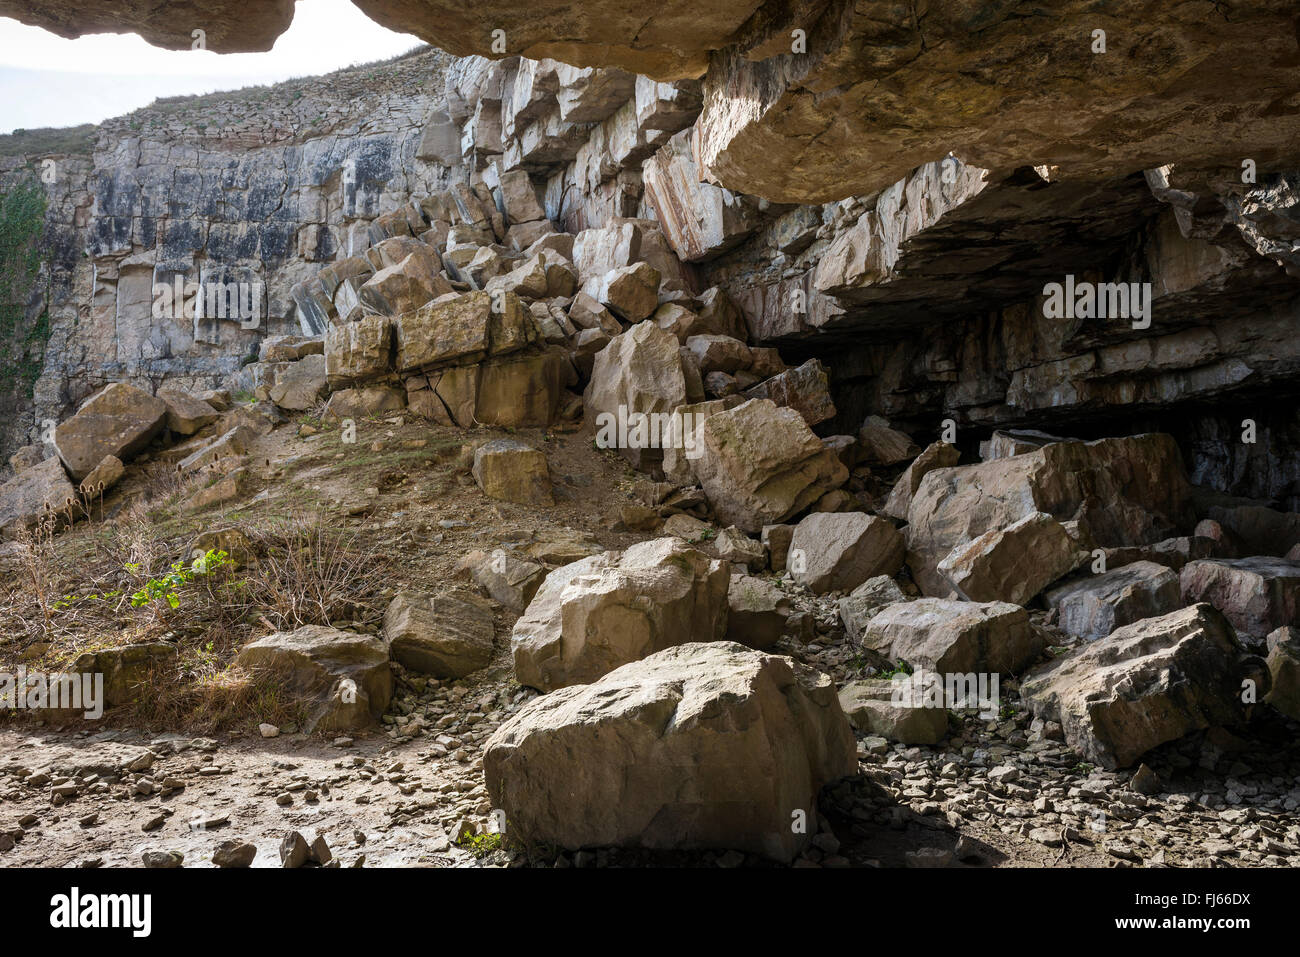 The disused Winspit Quarry near Worth Matravers on the Isle of Purbeck, Dorset, UK Stock Photo